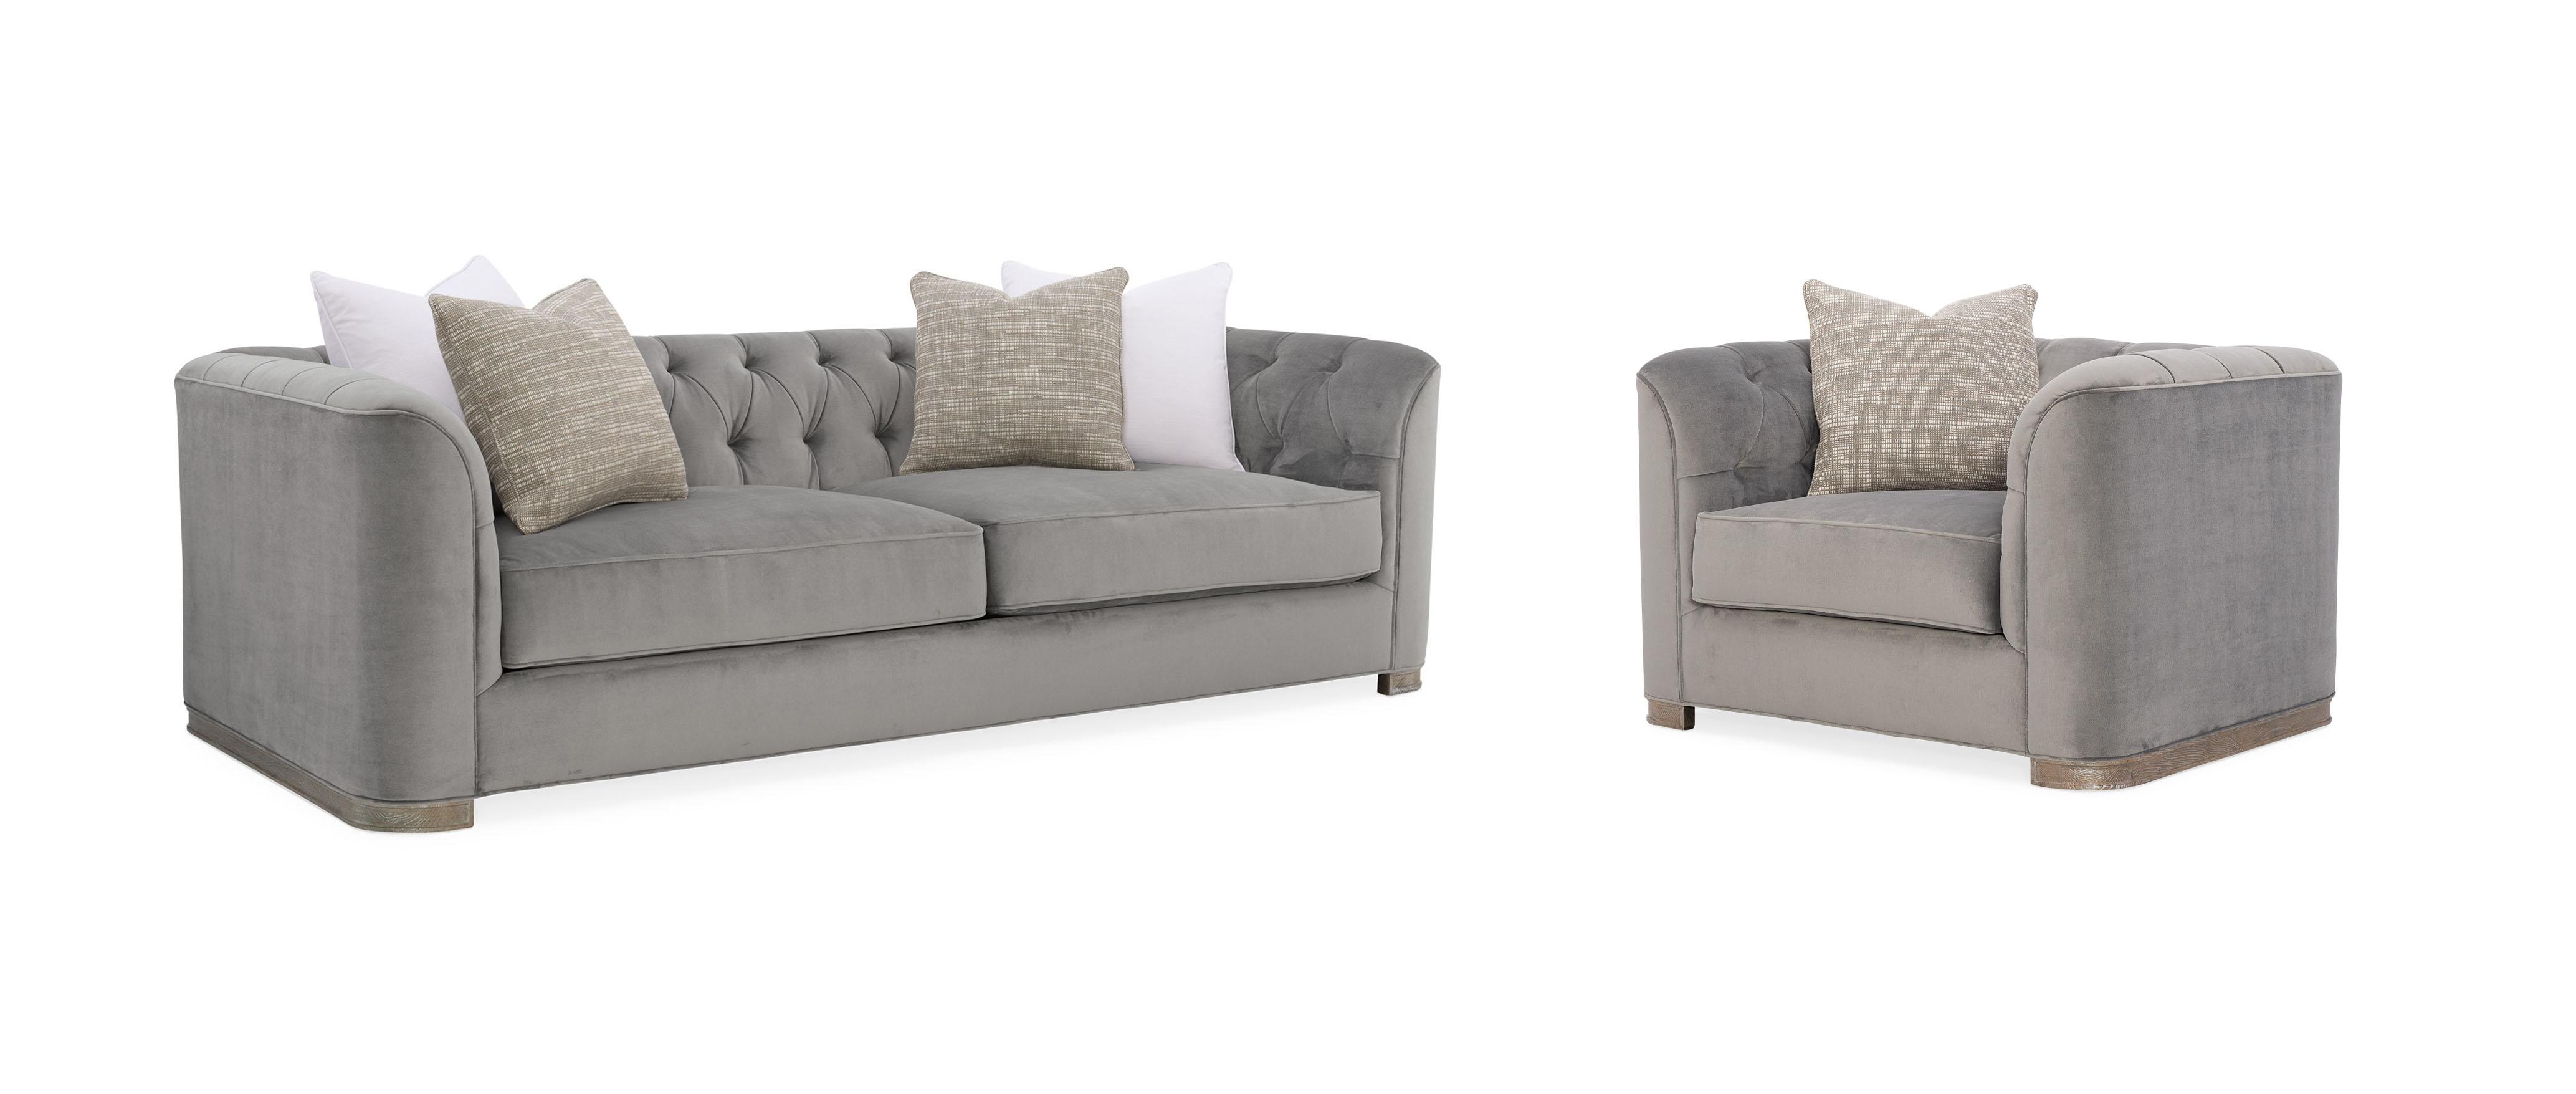 

    
Plush Gray Fabric Ash Driftwood Chesterfield Sofa Set 2Pcs TUFT GUY by Caracole
